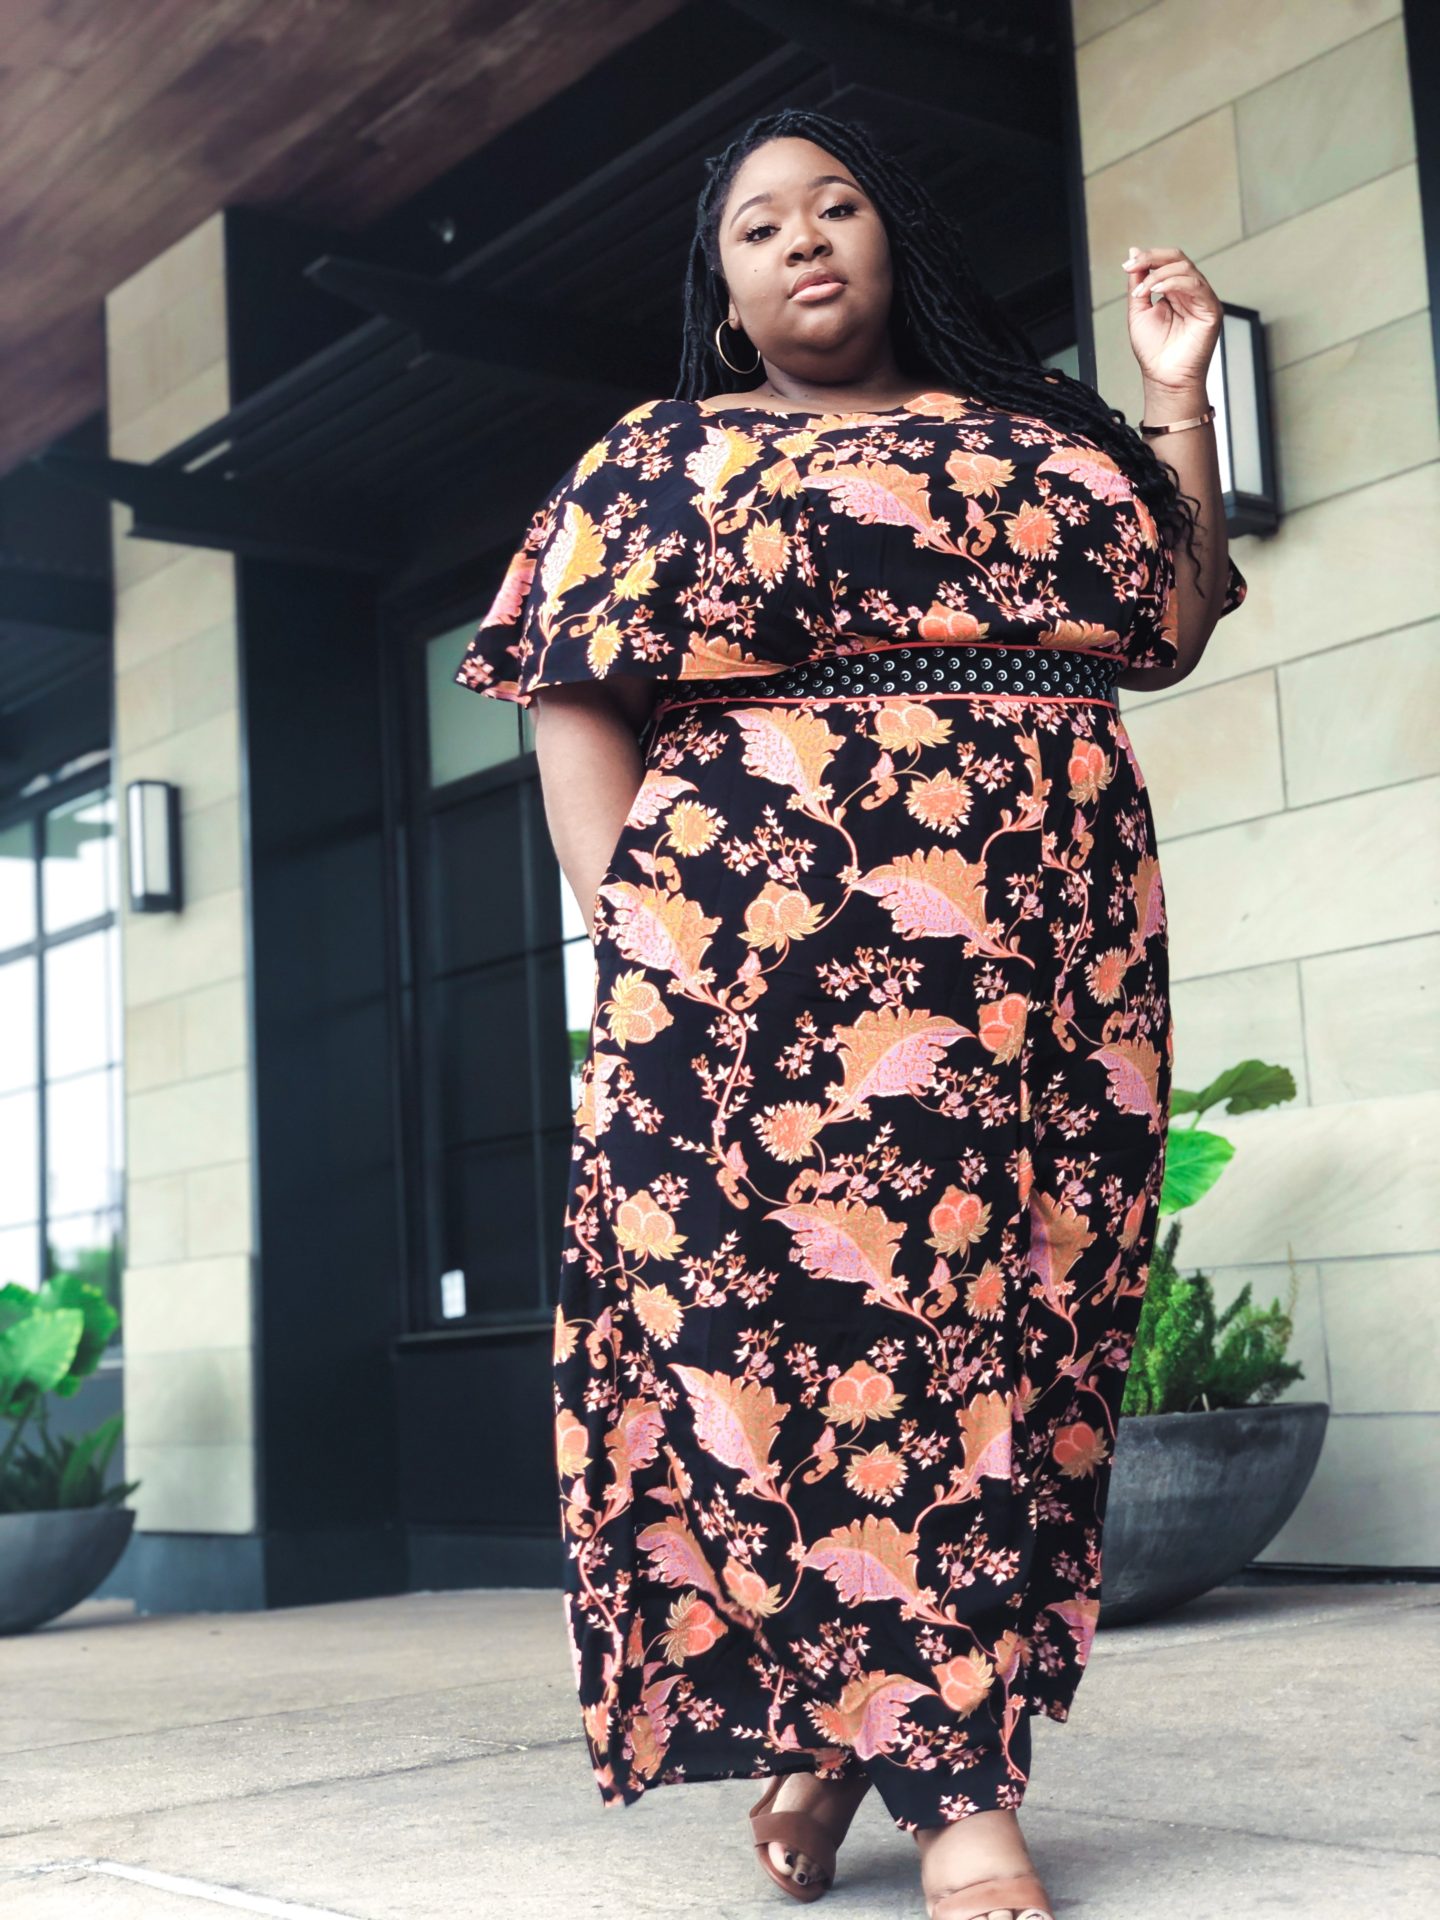 Plus Size Fashion | Anthropologie A+ Launch - From Head To Curve